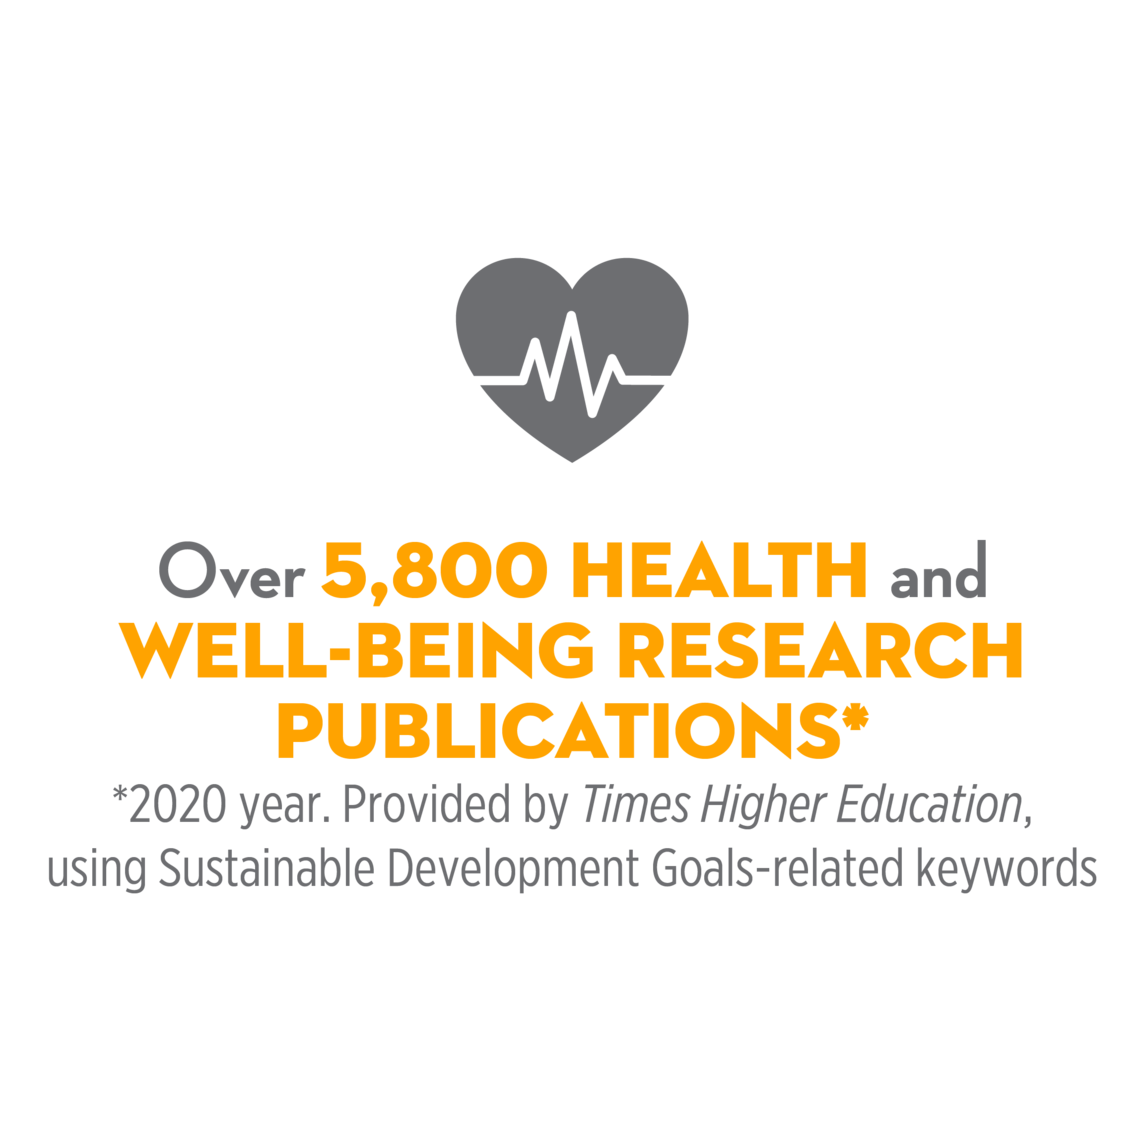 Over 5,800 Health and well-being research publications